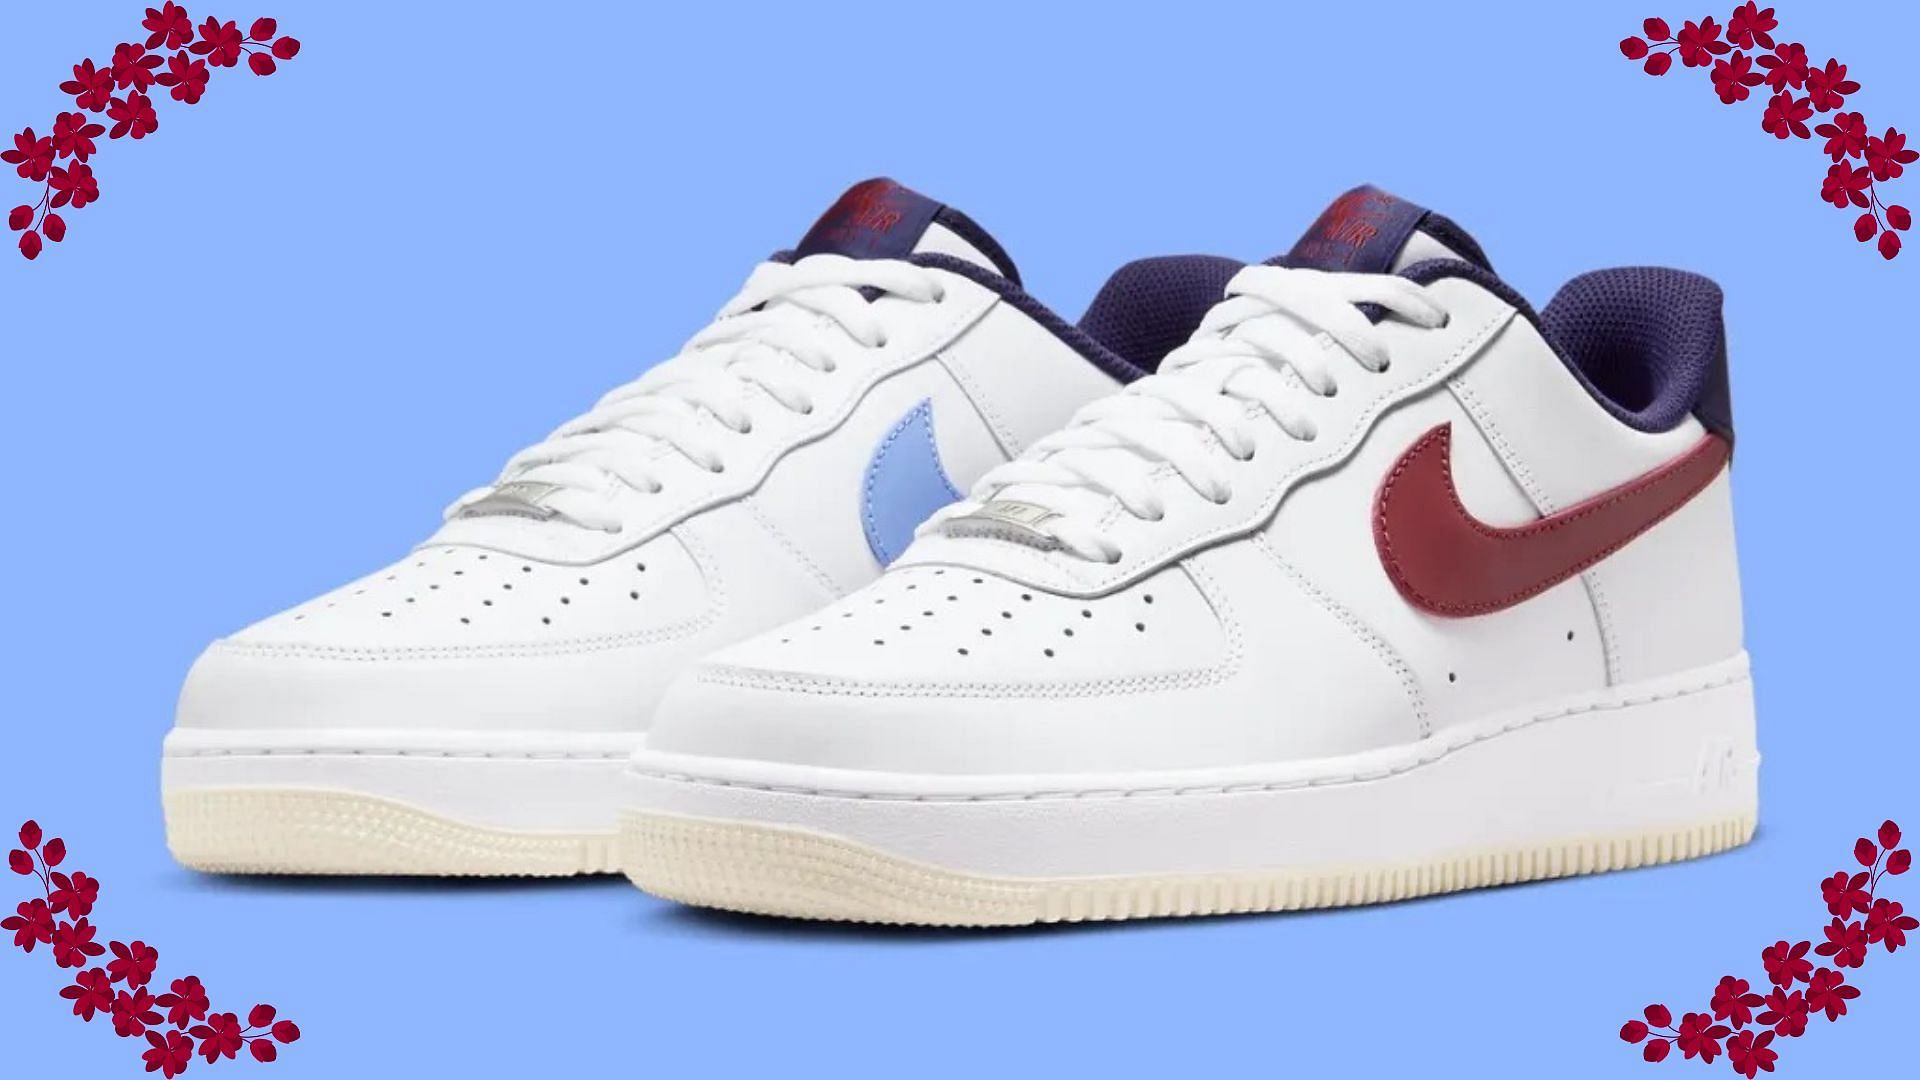 Nike Air Force 1 Low From Nike to You sneakers (Image via Nike)